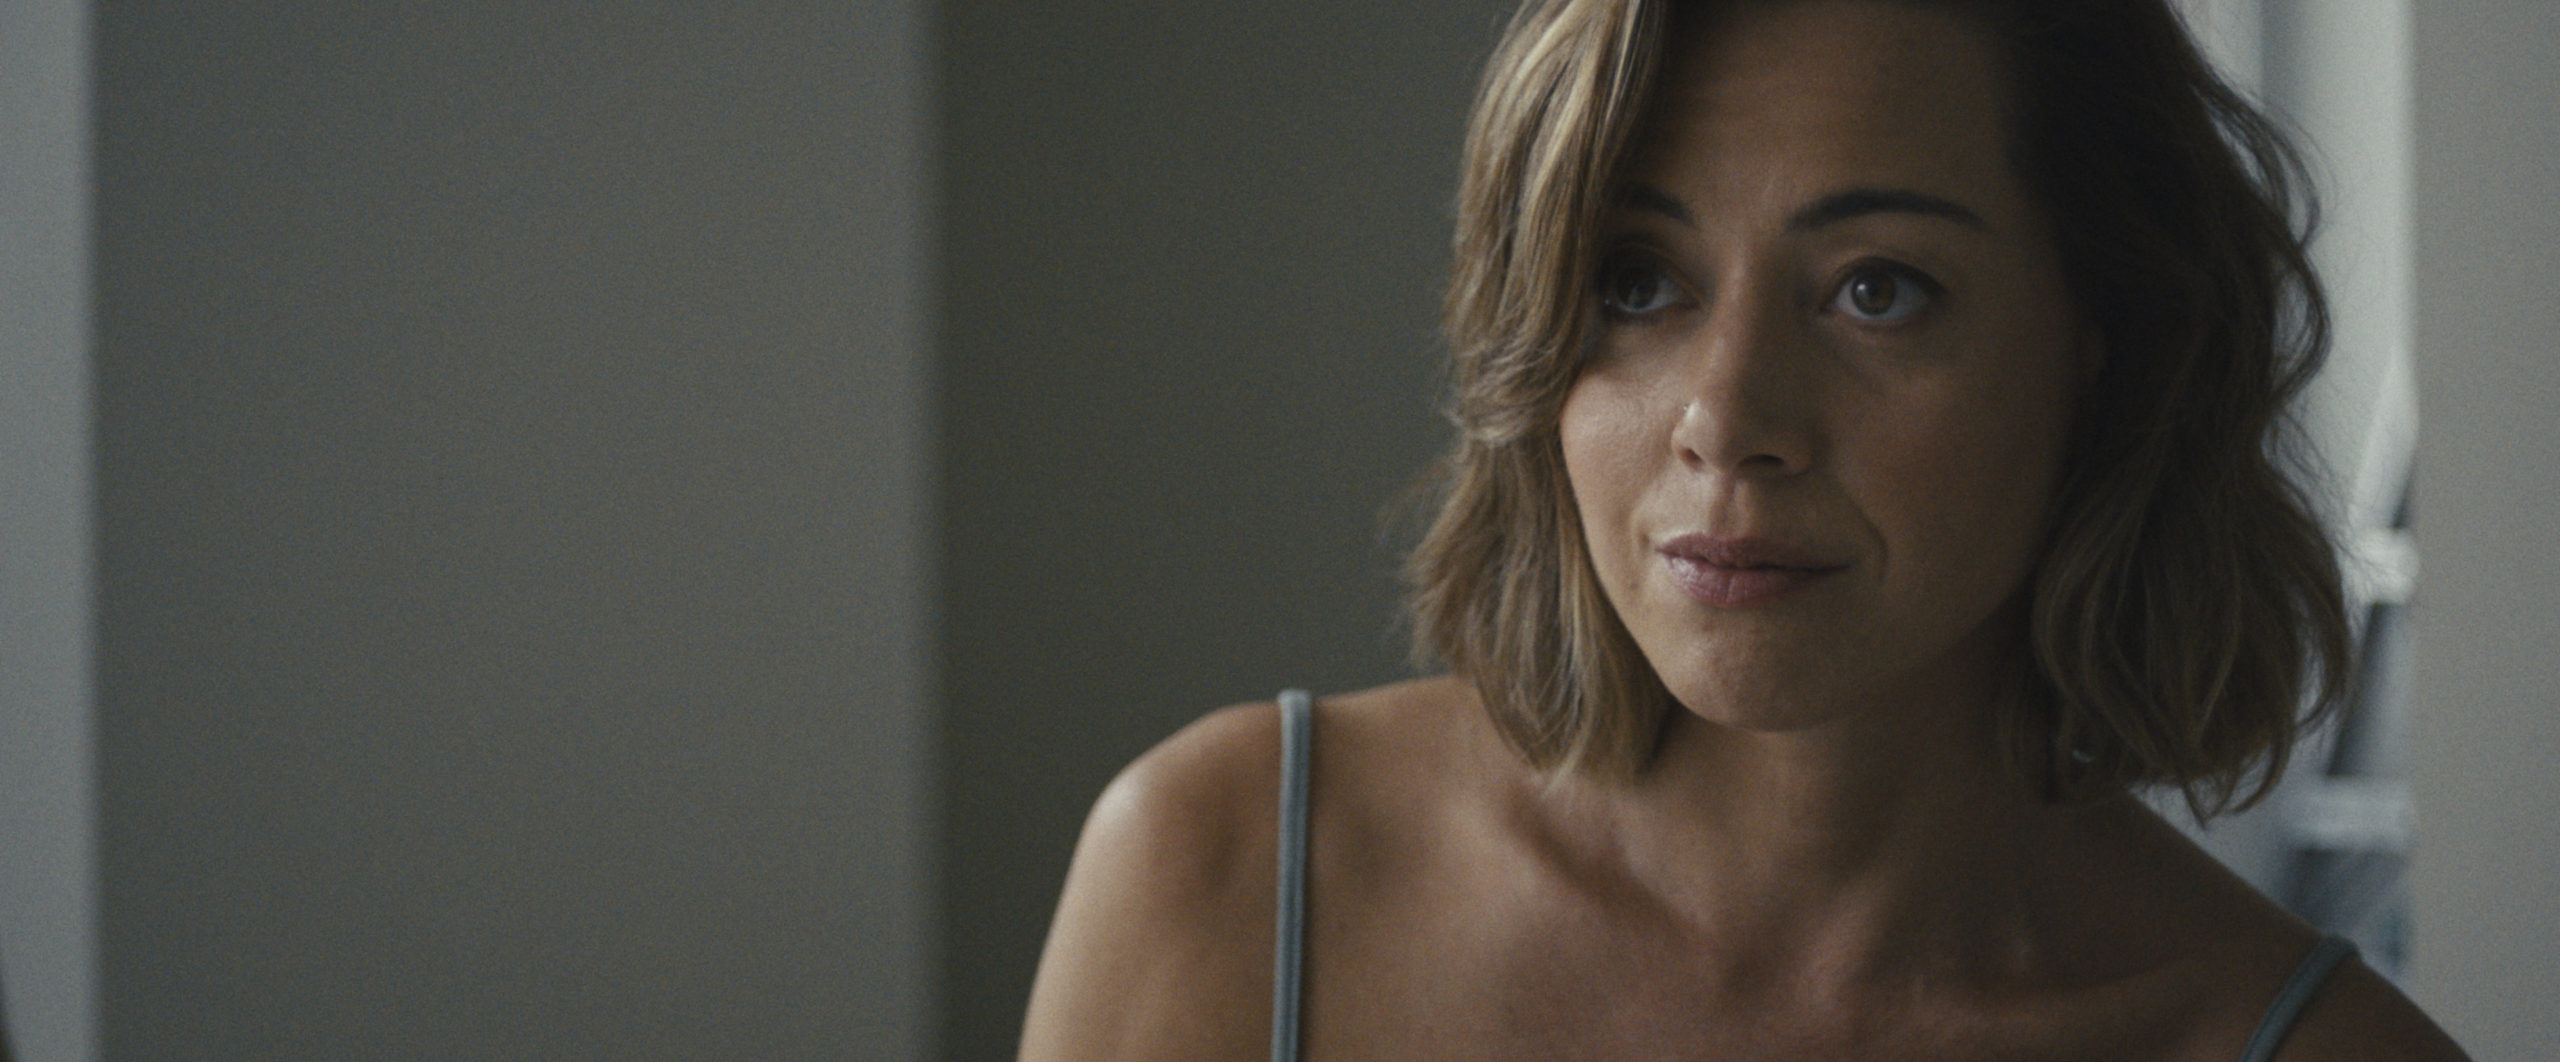 Aubrey Plaza Cast in HBO's 'White Lotus' Upcoming Season Two